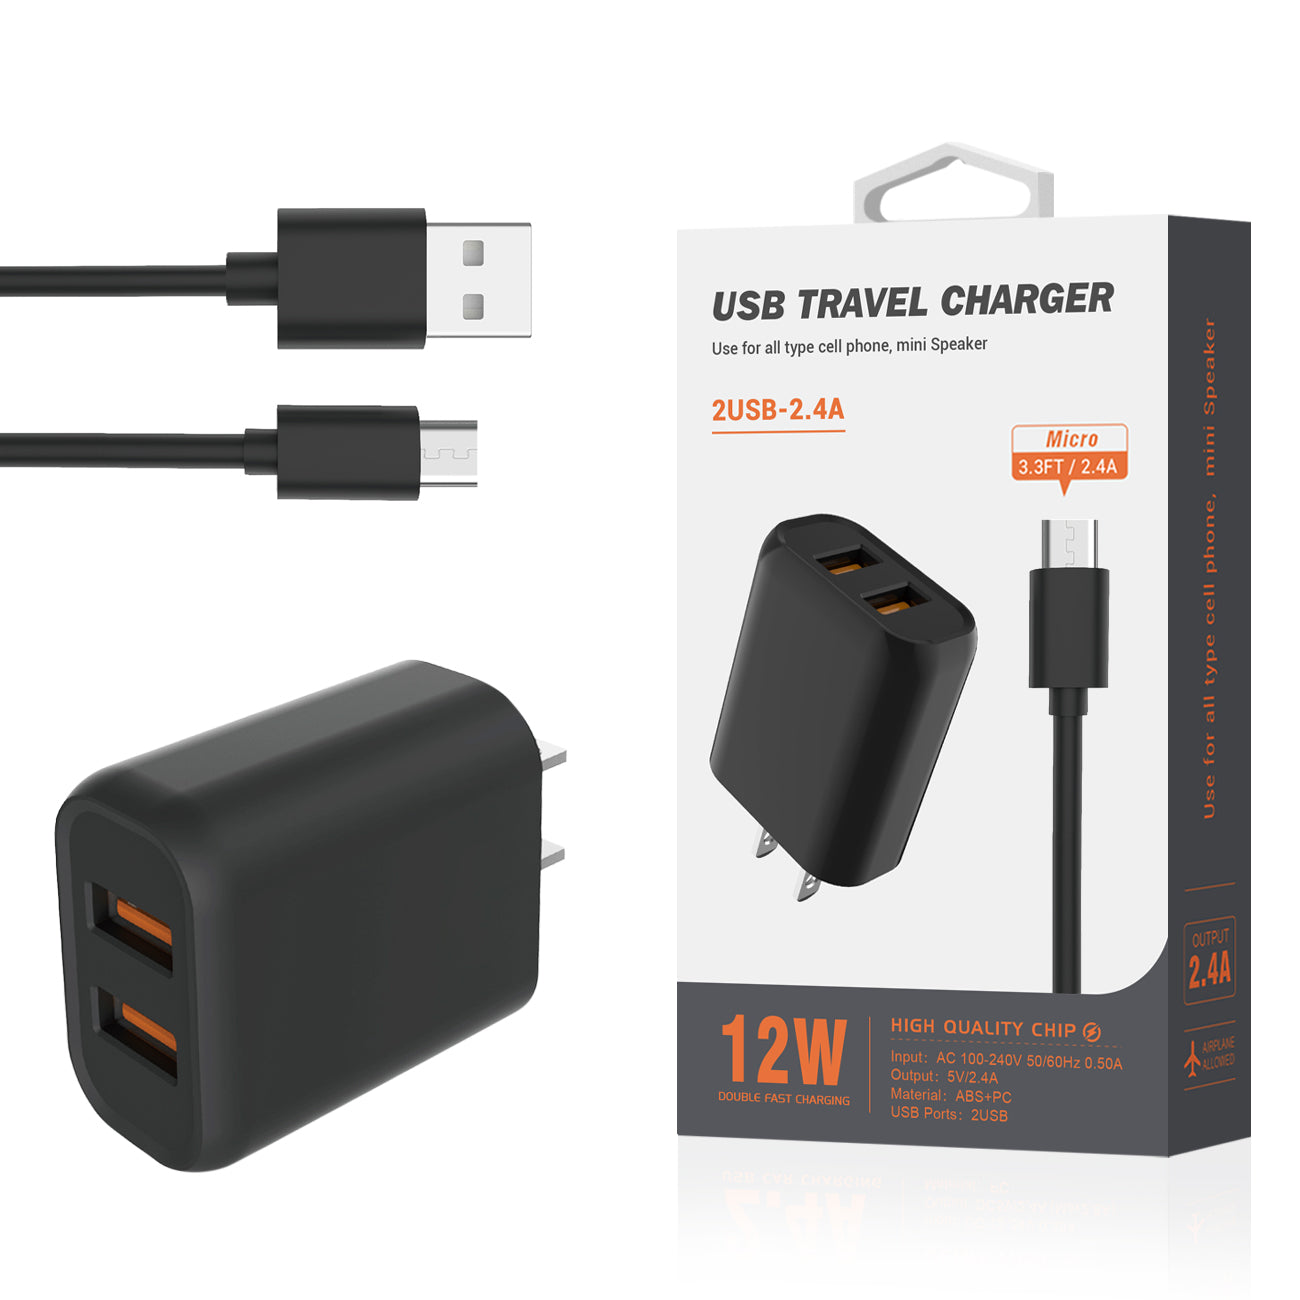 Travel Home Charger Micro With Built In Cable 5Ft Reiko Portable Black Color